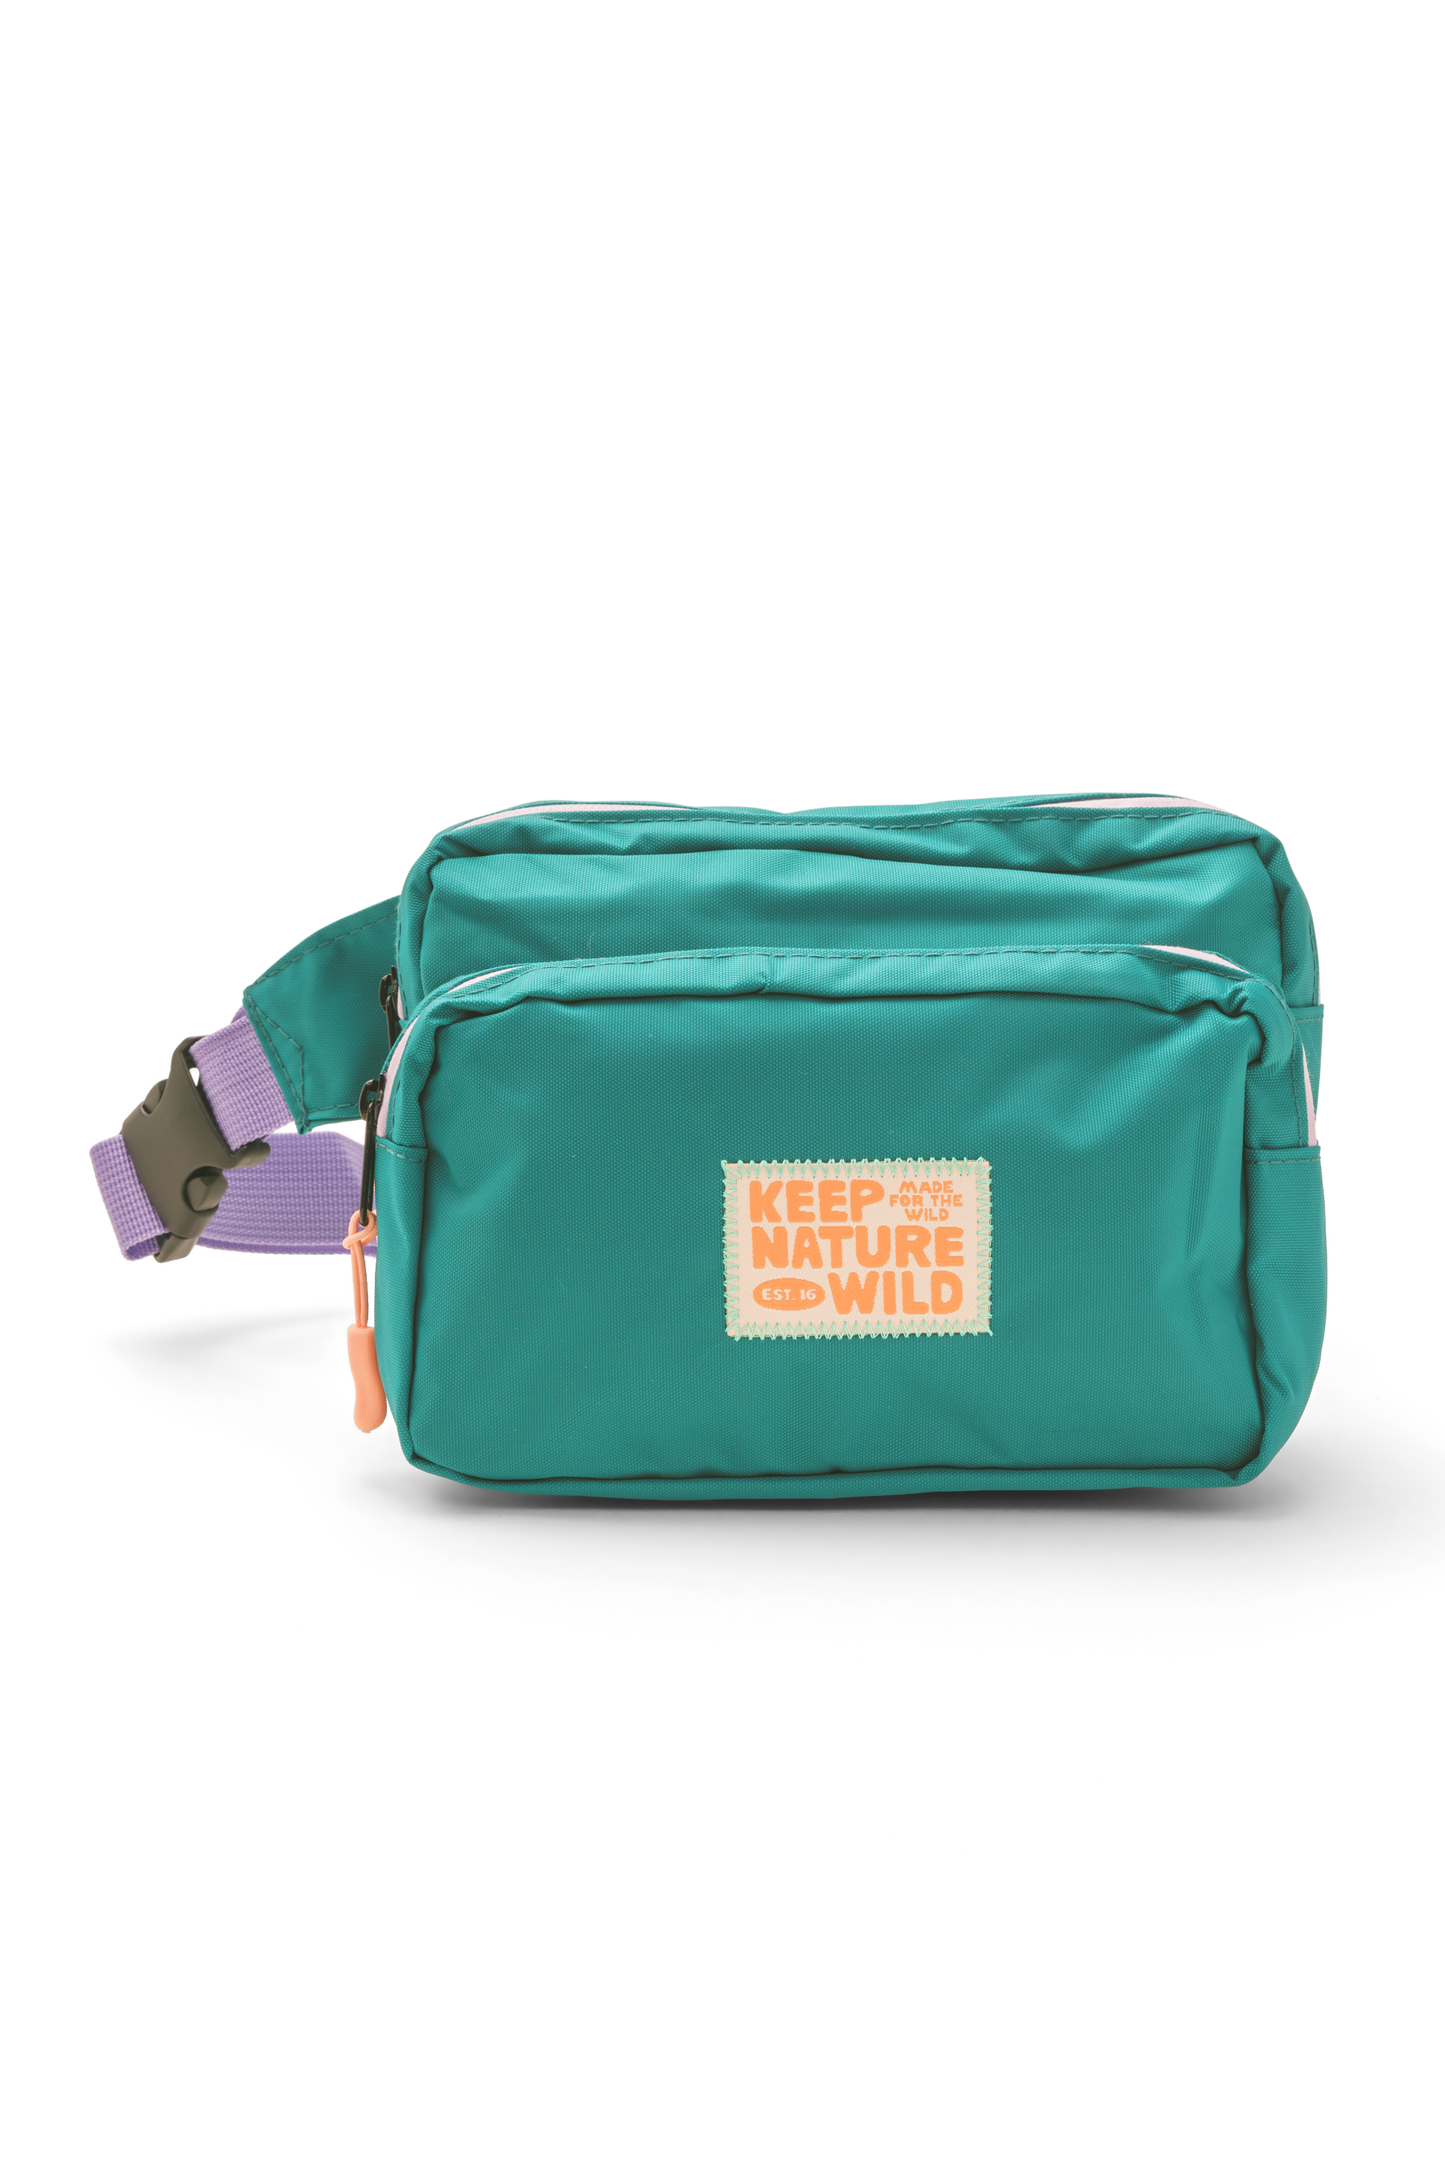 Keep Nature Wild - Adventure Fanny Pack | Teal/Lavender